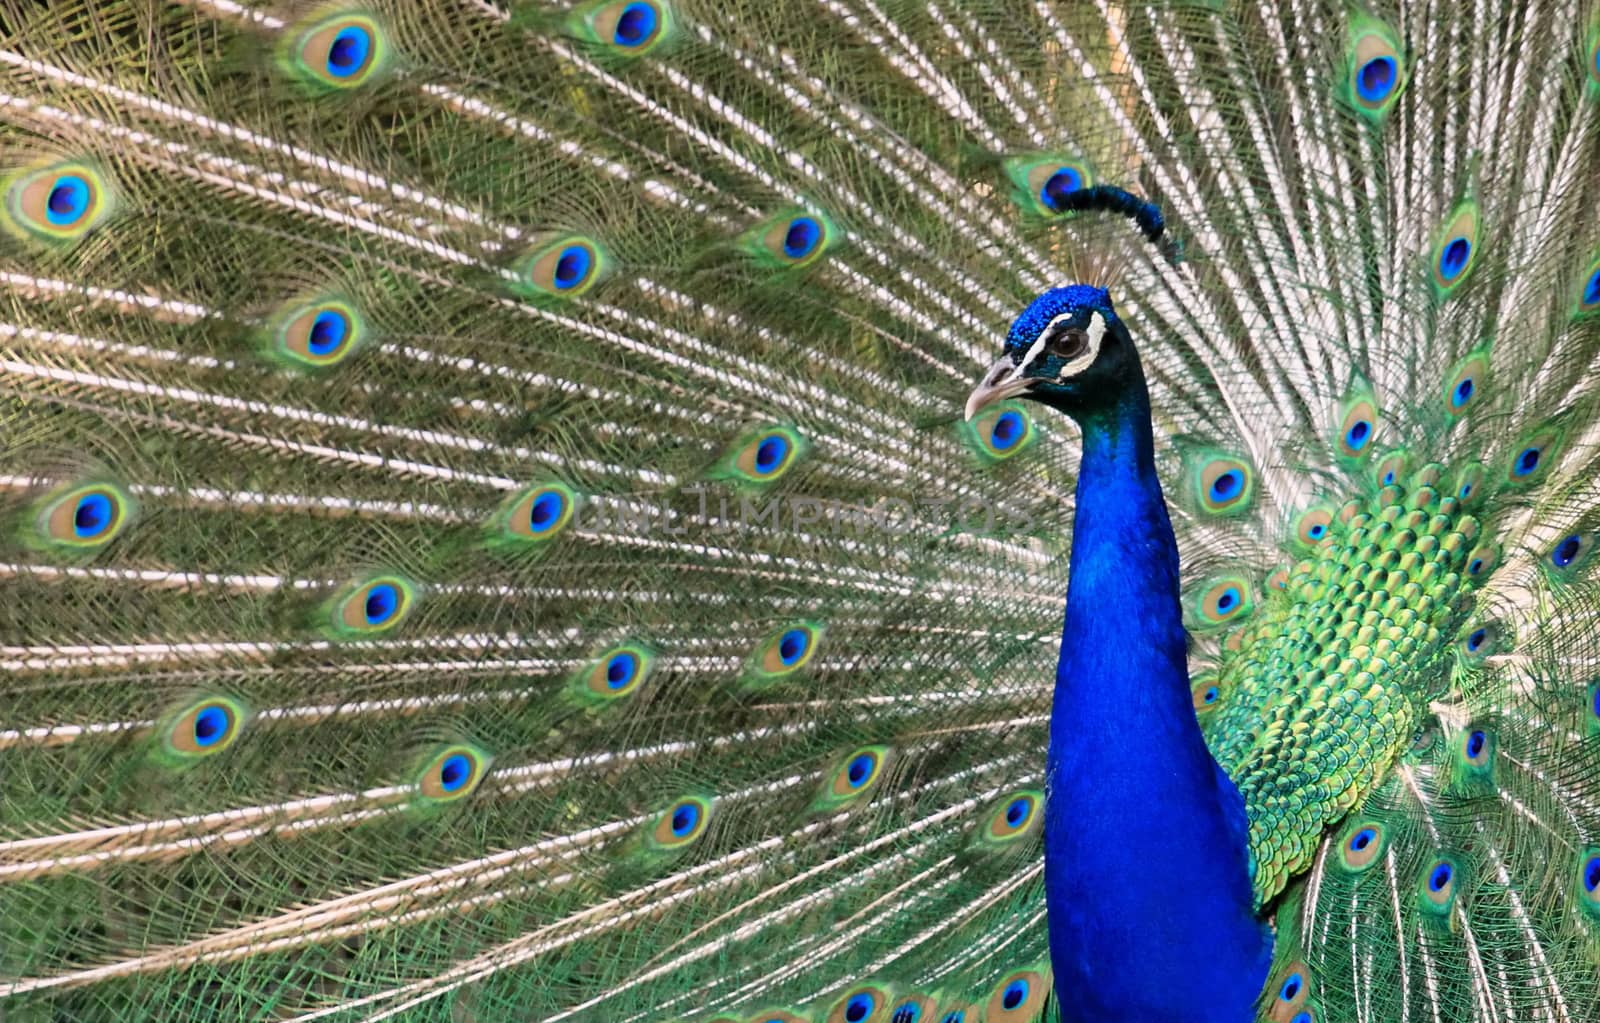 Bright colorful peacock with its colourful tail fully opened